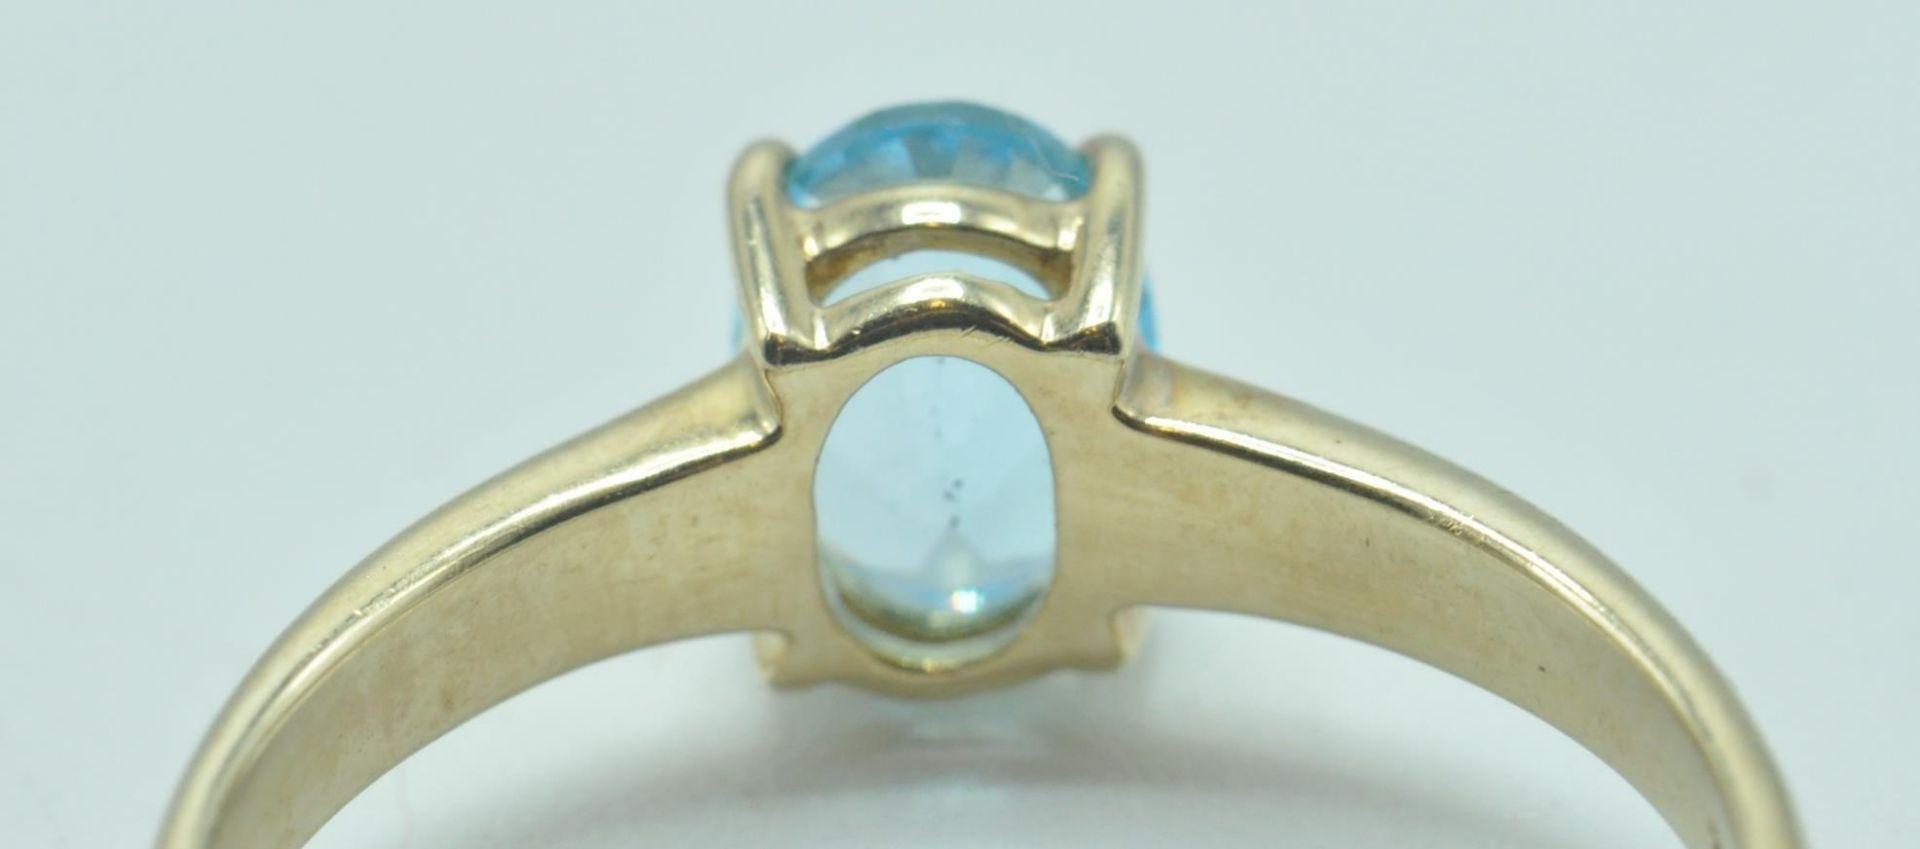 9CT GOLD AND BLUE STONE SOLITAIRE RING - Image 6 of 6